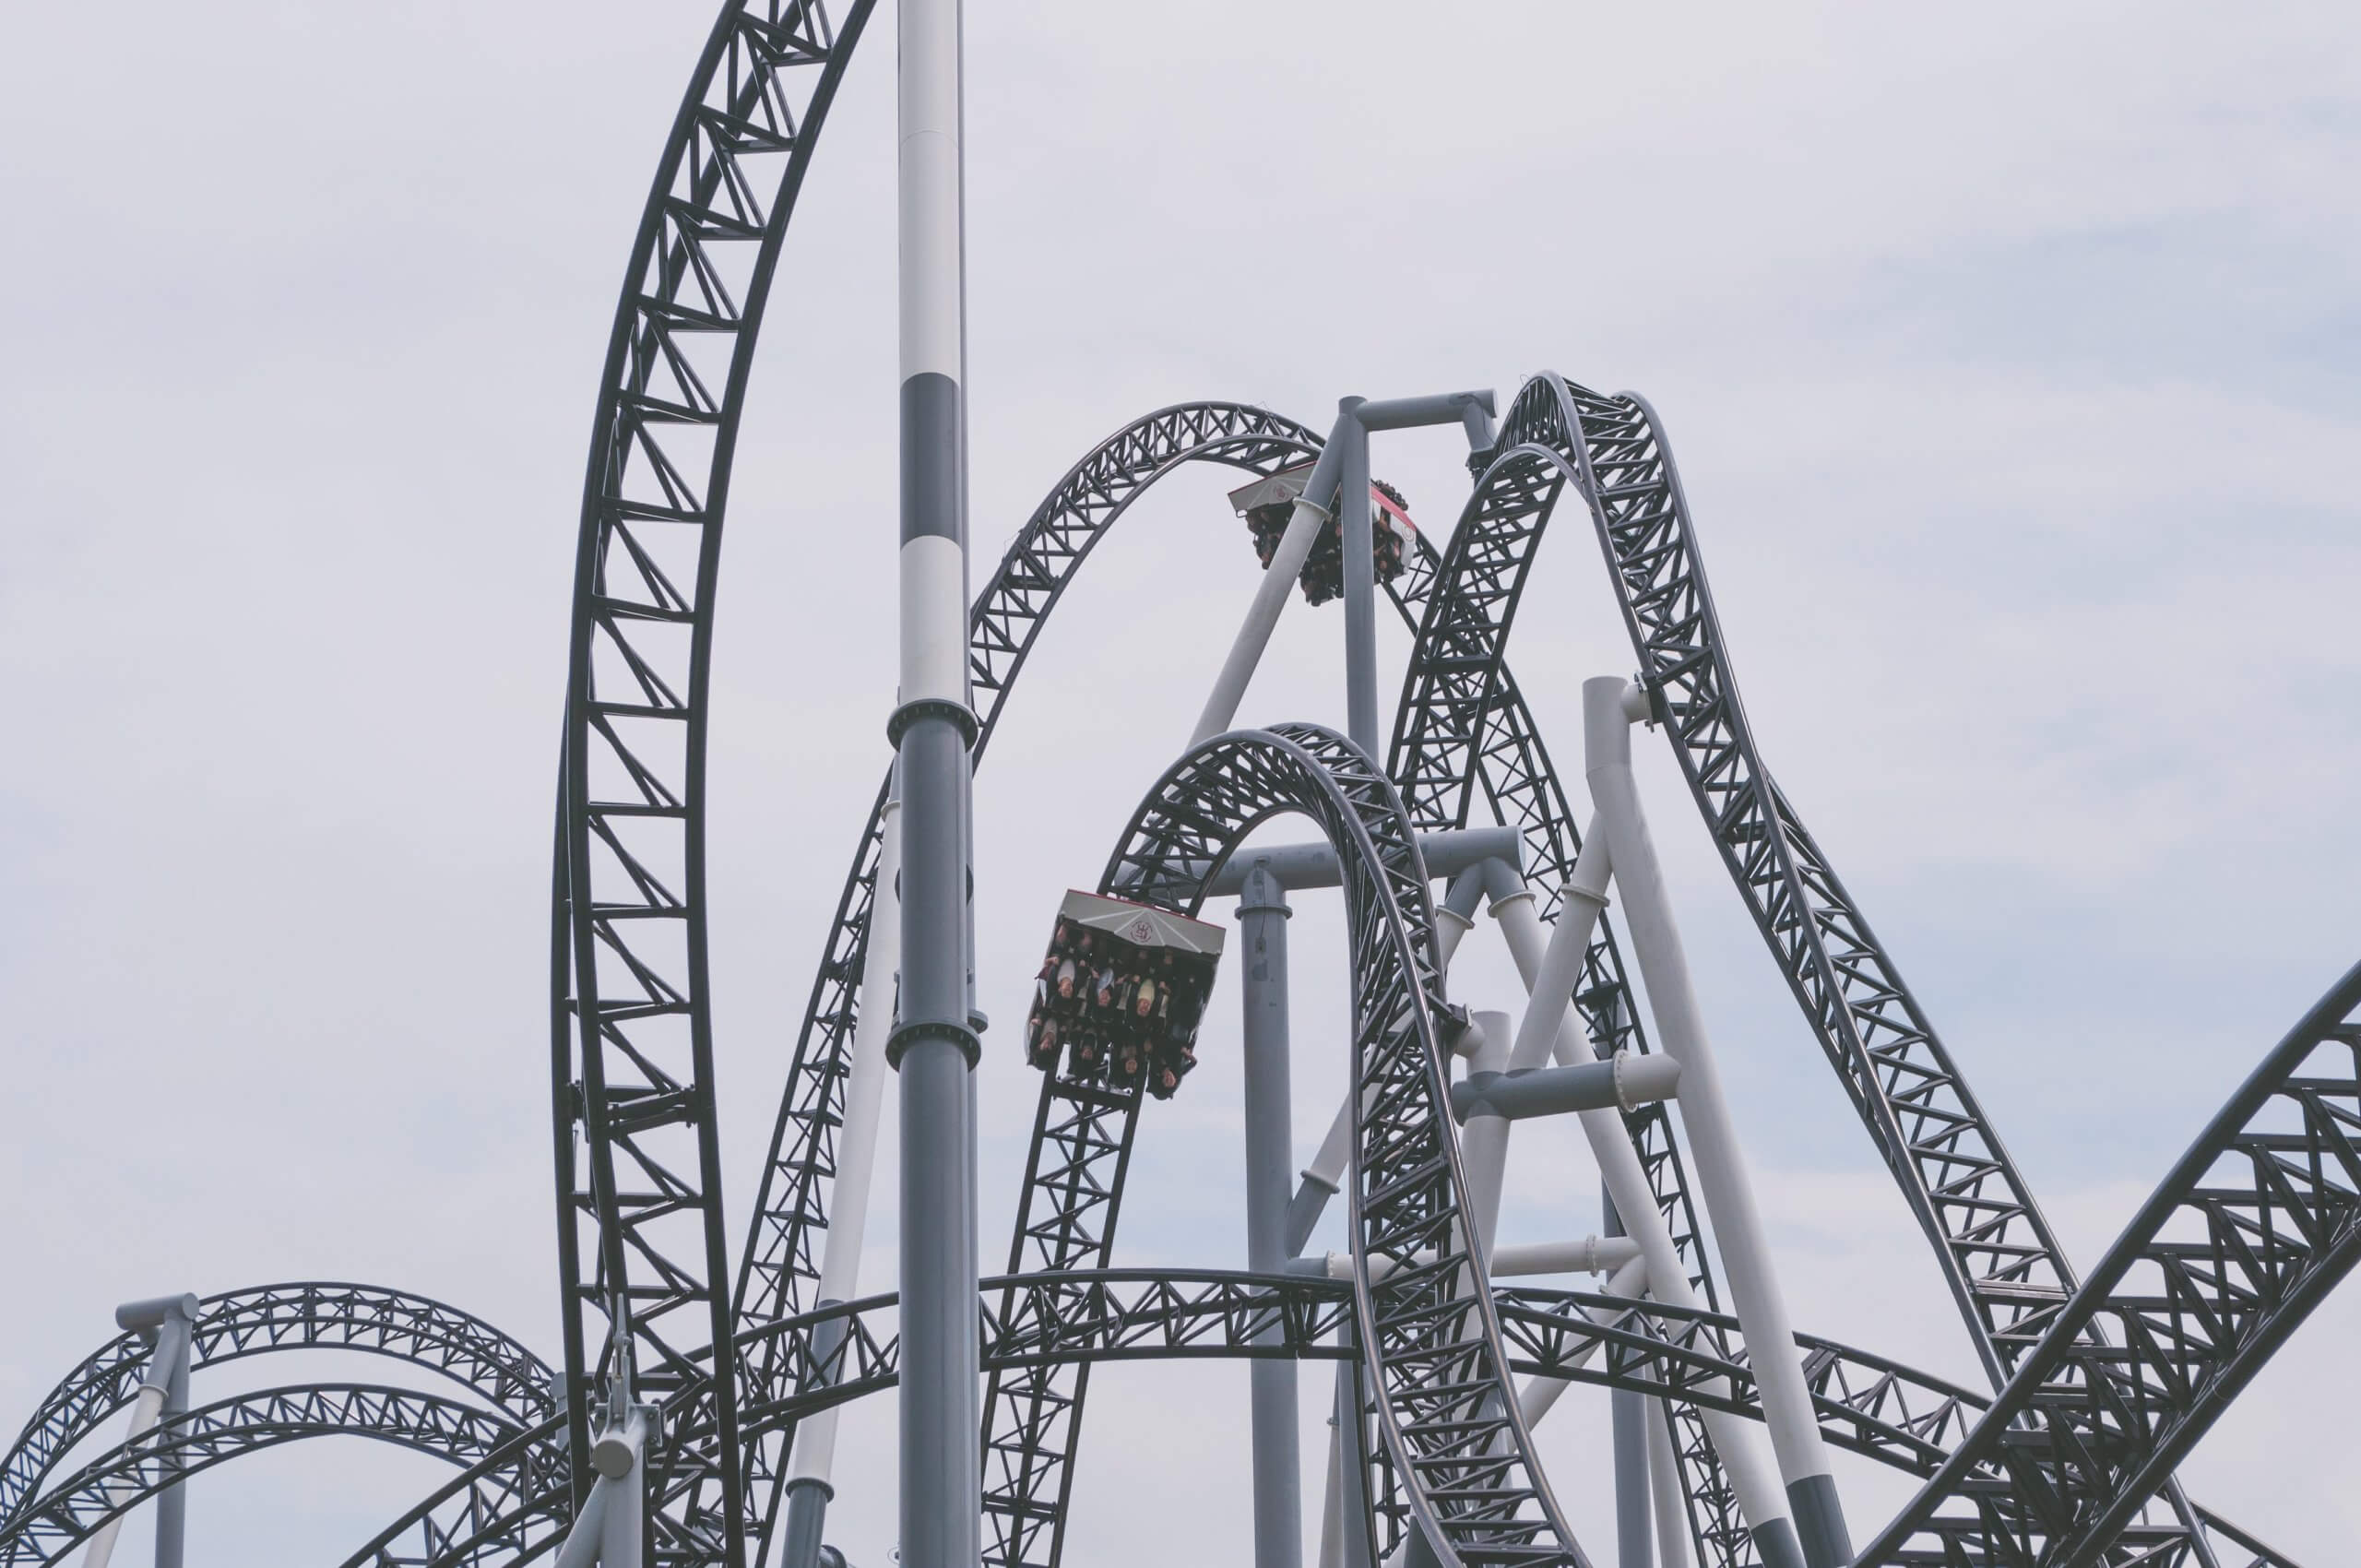 An image of a roller coaster which represented the twists and turns my professional life has experienced with this virus.